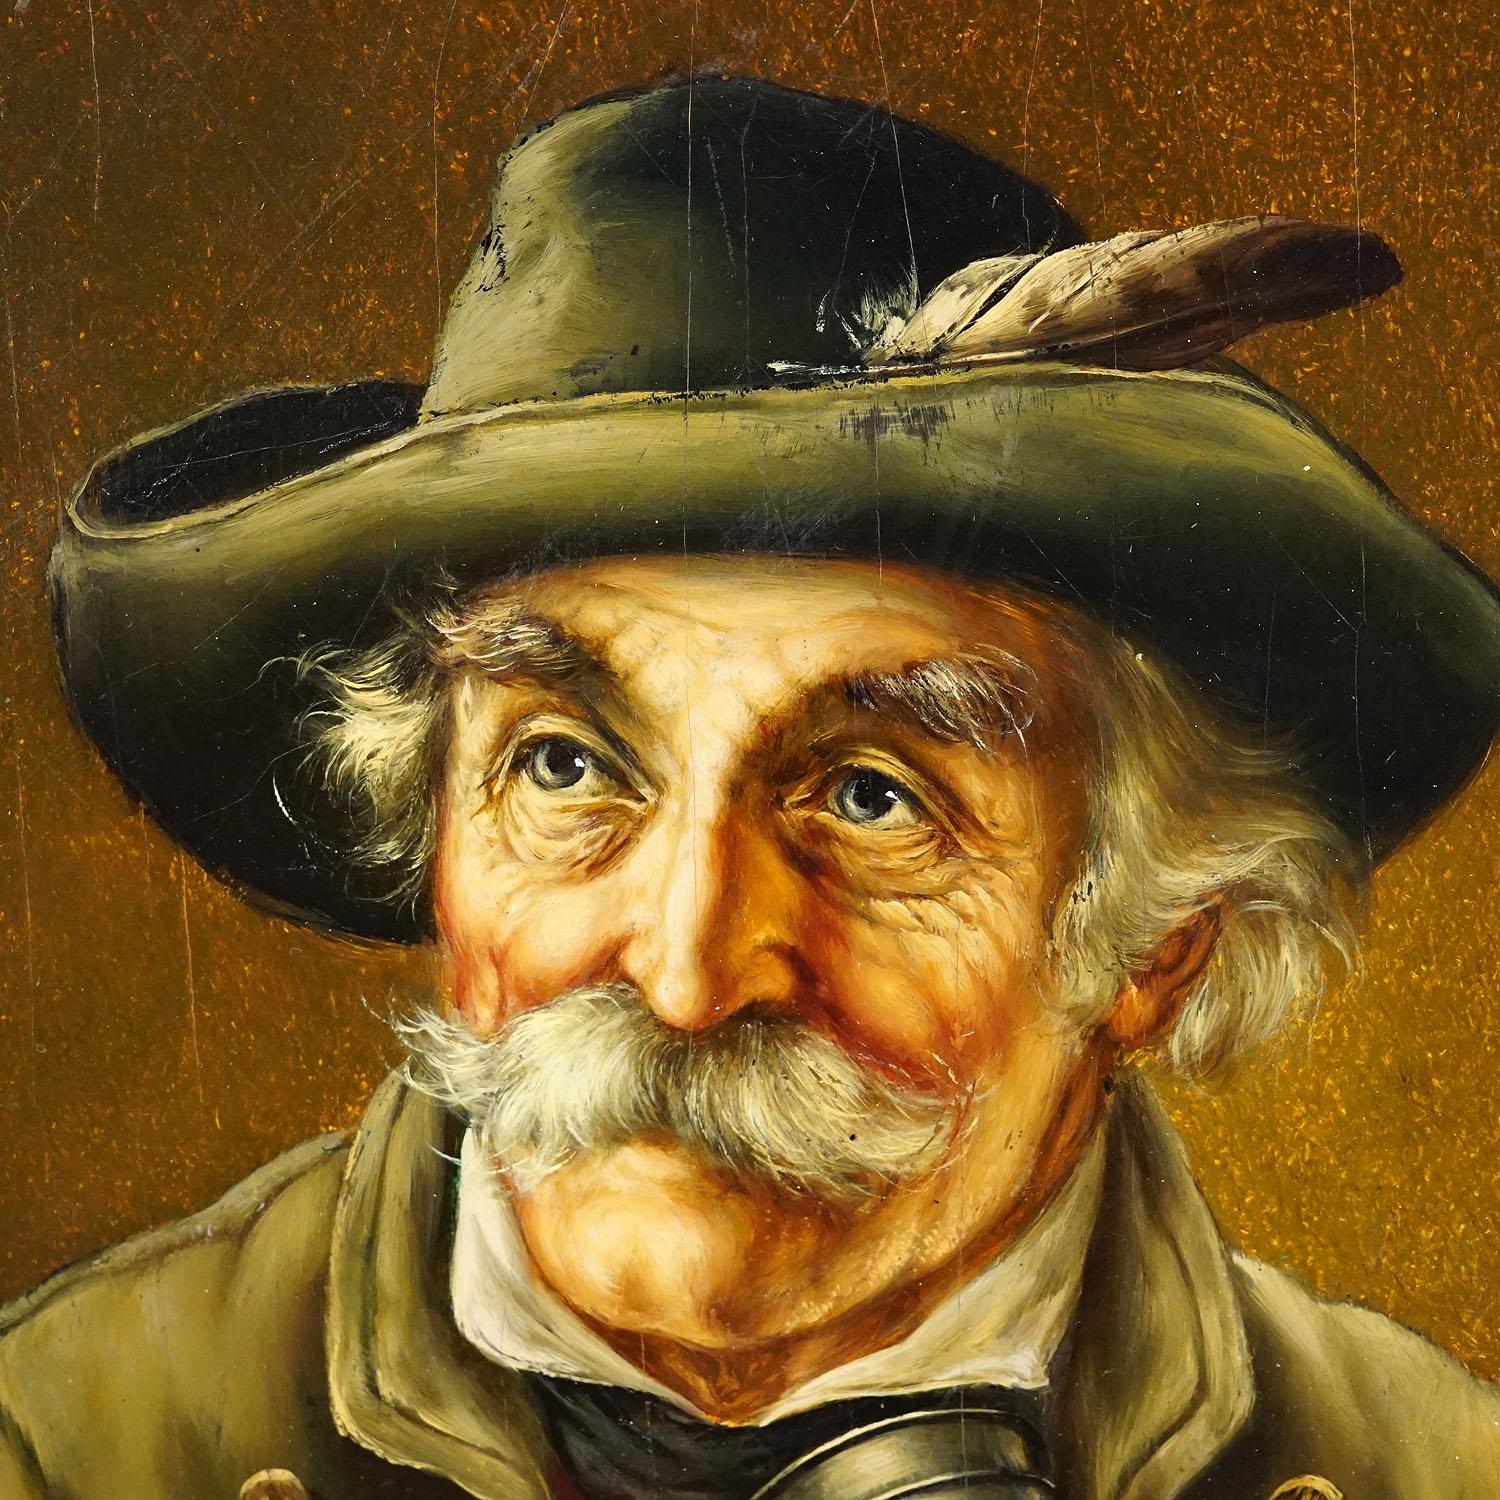 Painted J. Gruber - Portrait of a Bavarian Folksy Man with Beer Mug, Oil on Wood For Sale